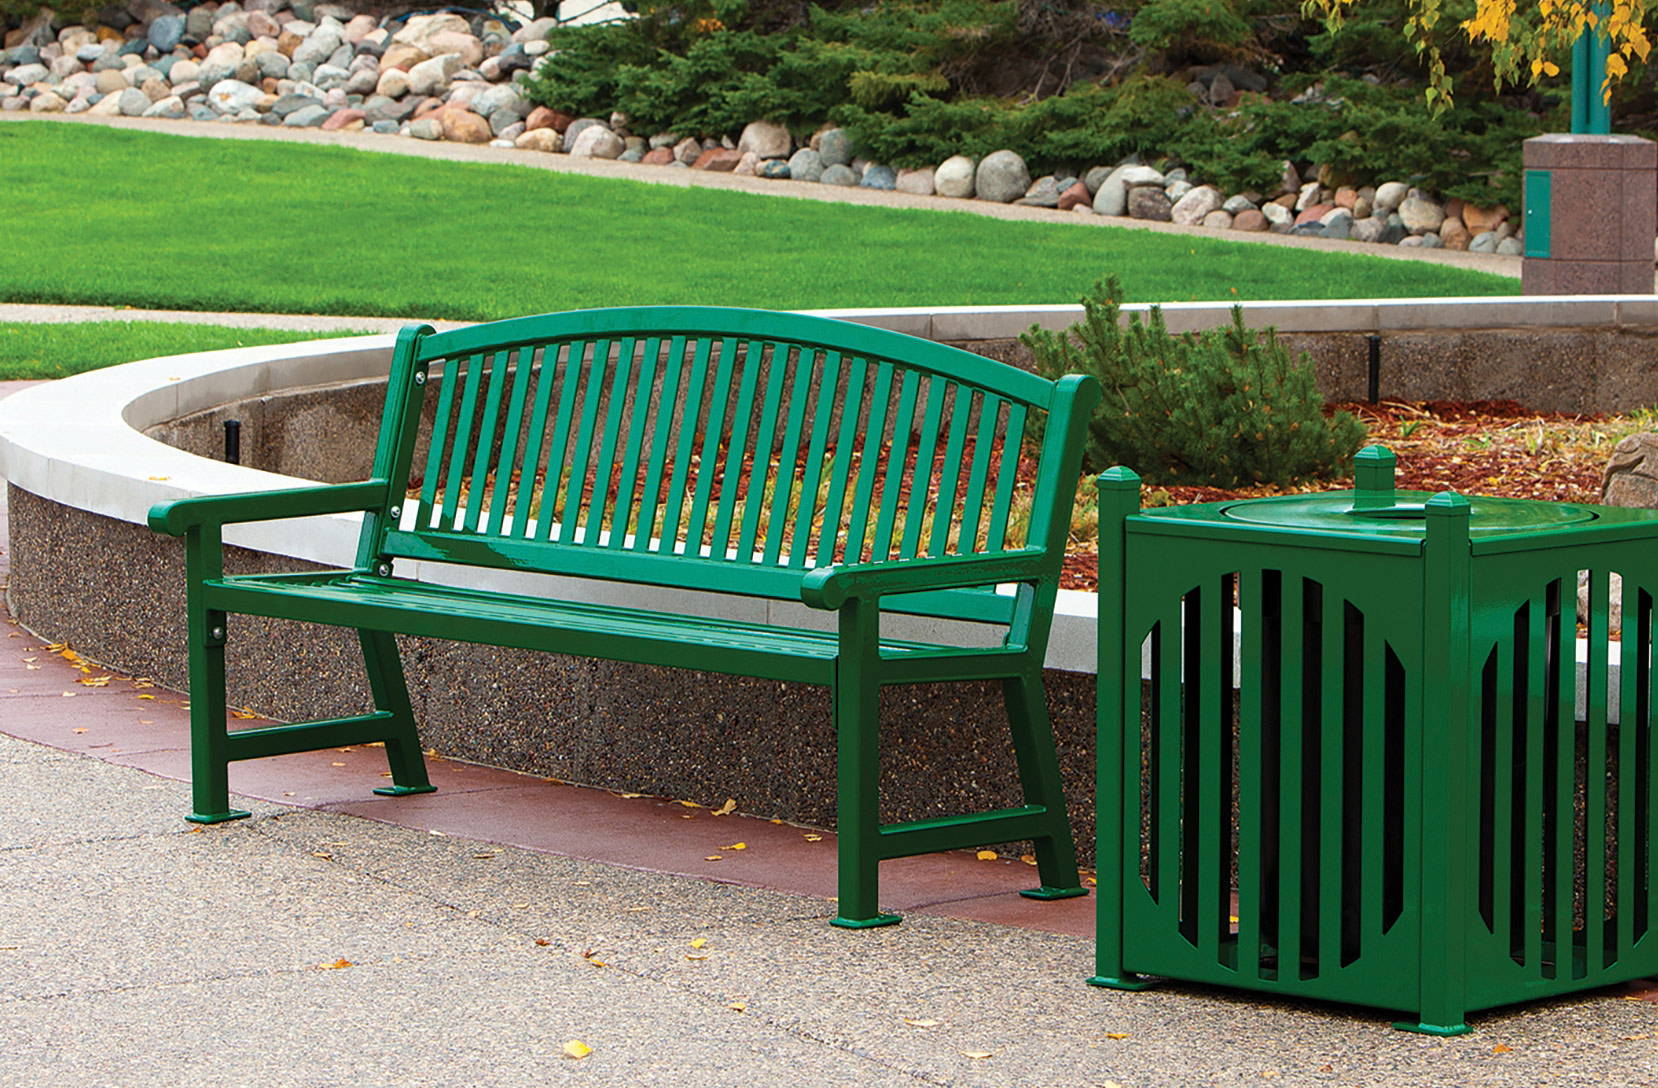 Beautiful Park Furniture, Park Benches, Trash Cans & Trash Receptacles, & Picnic Tables for Parks & Schools